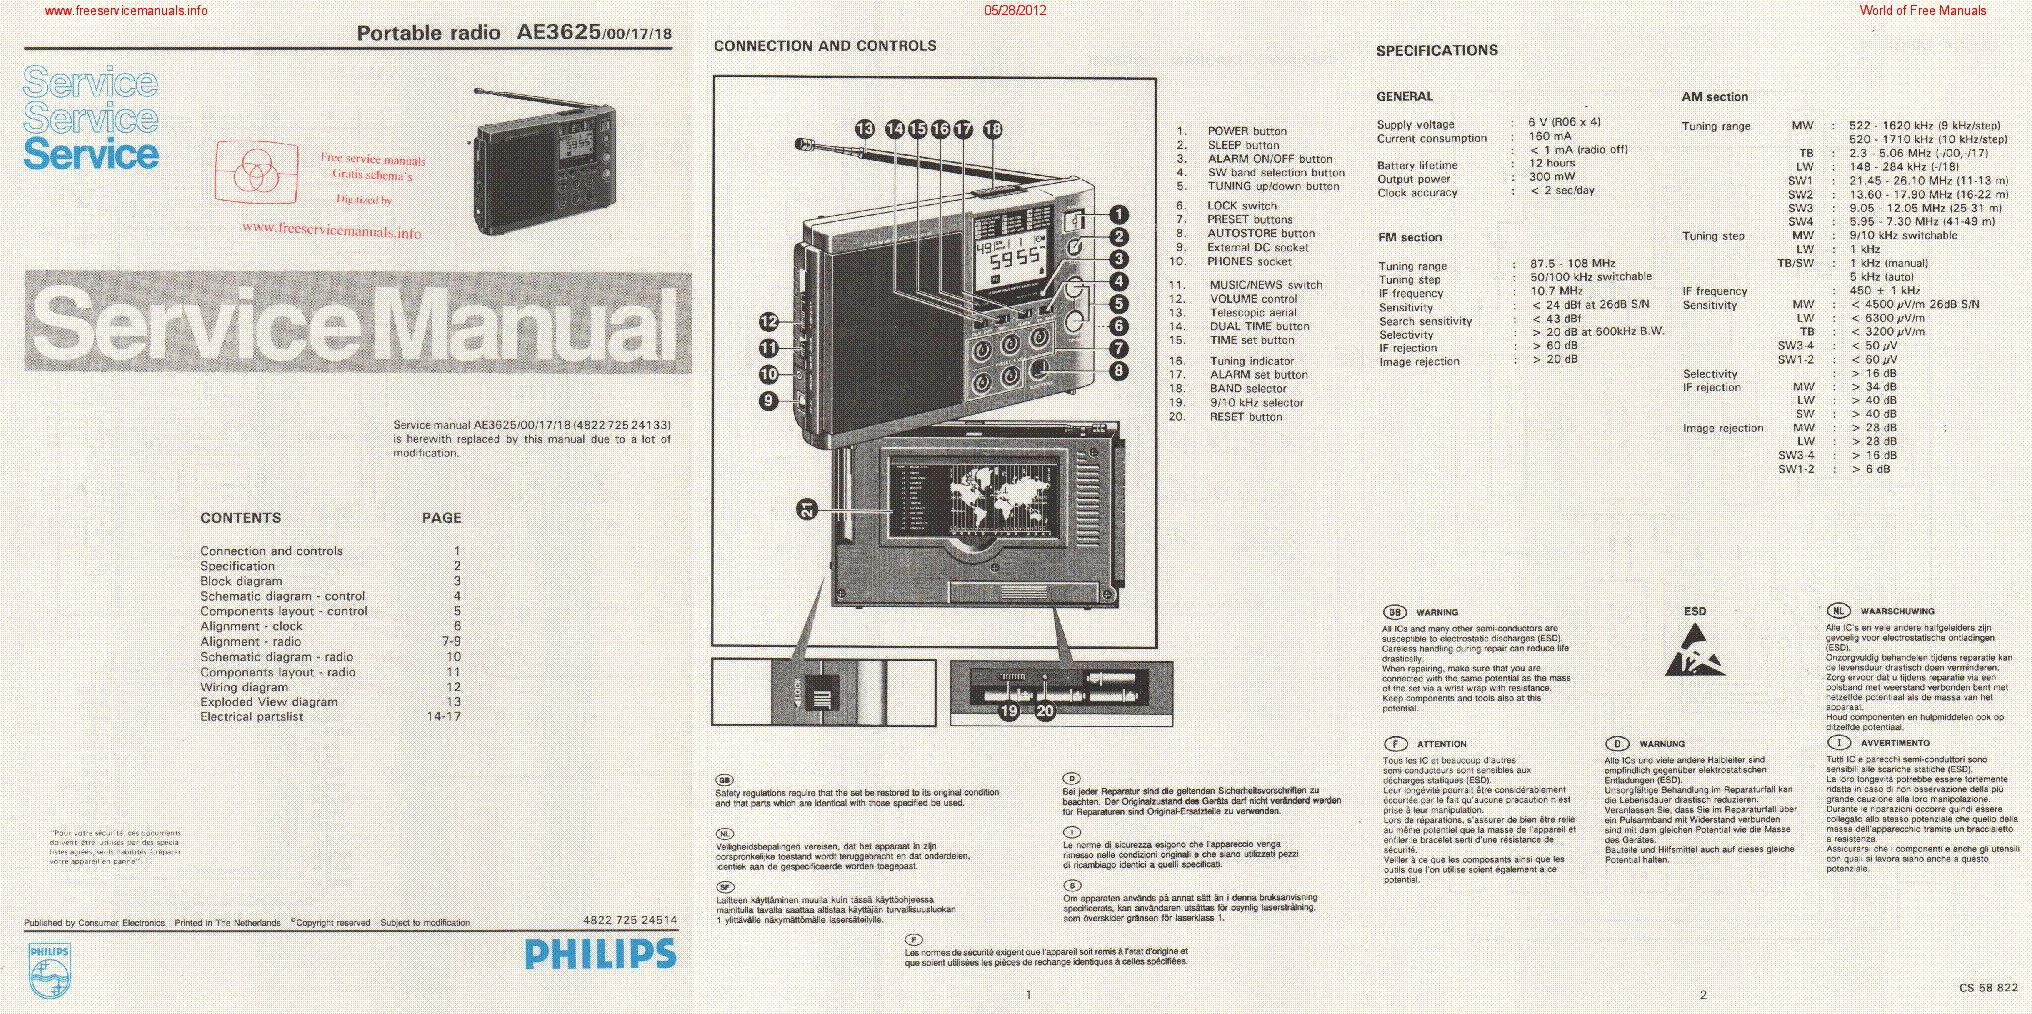 PHILIPS AE3625 service manual (1st page)